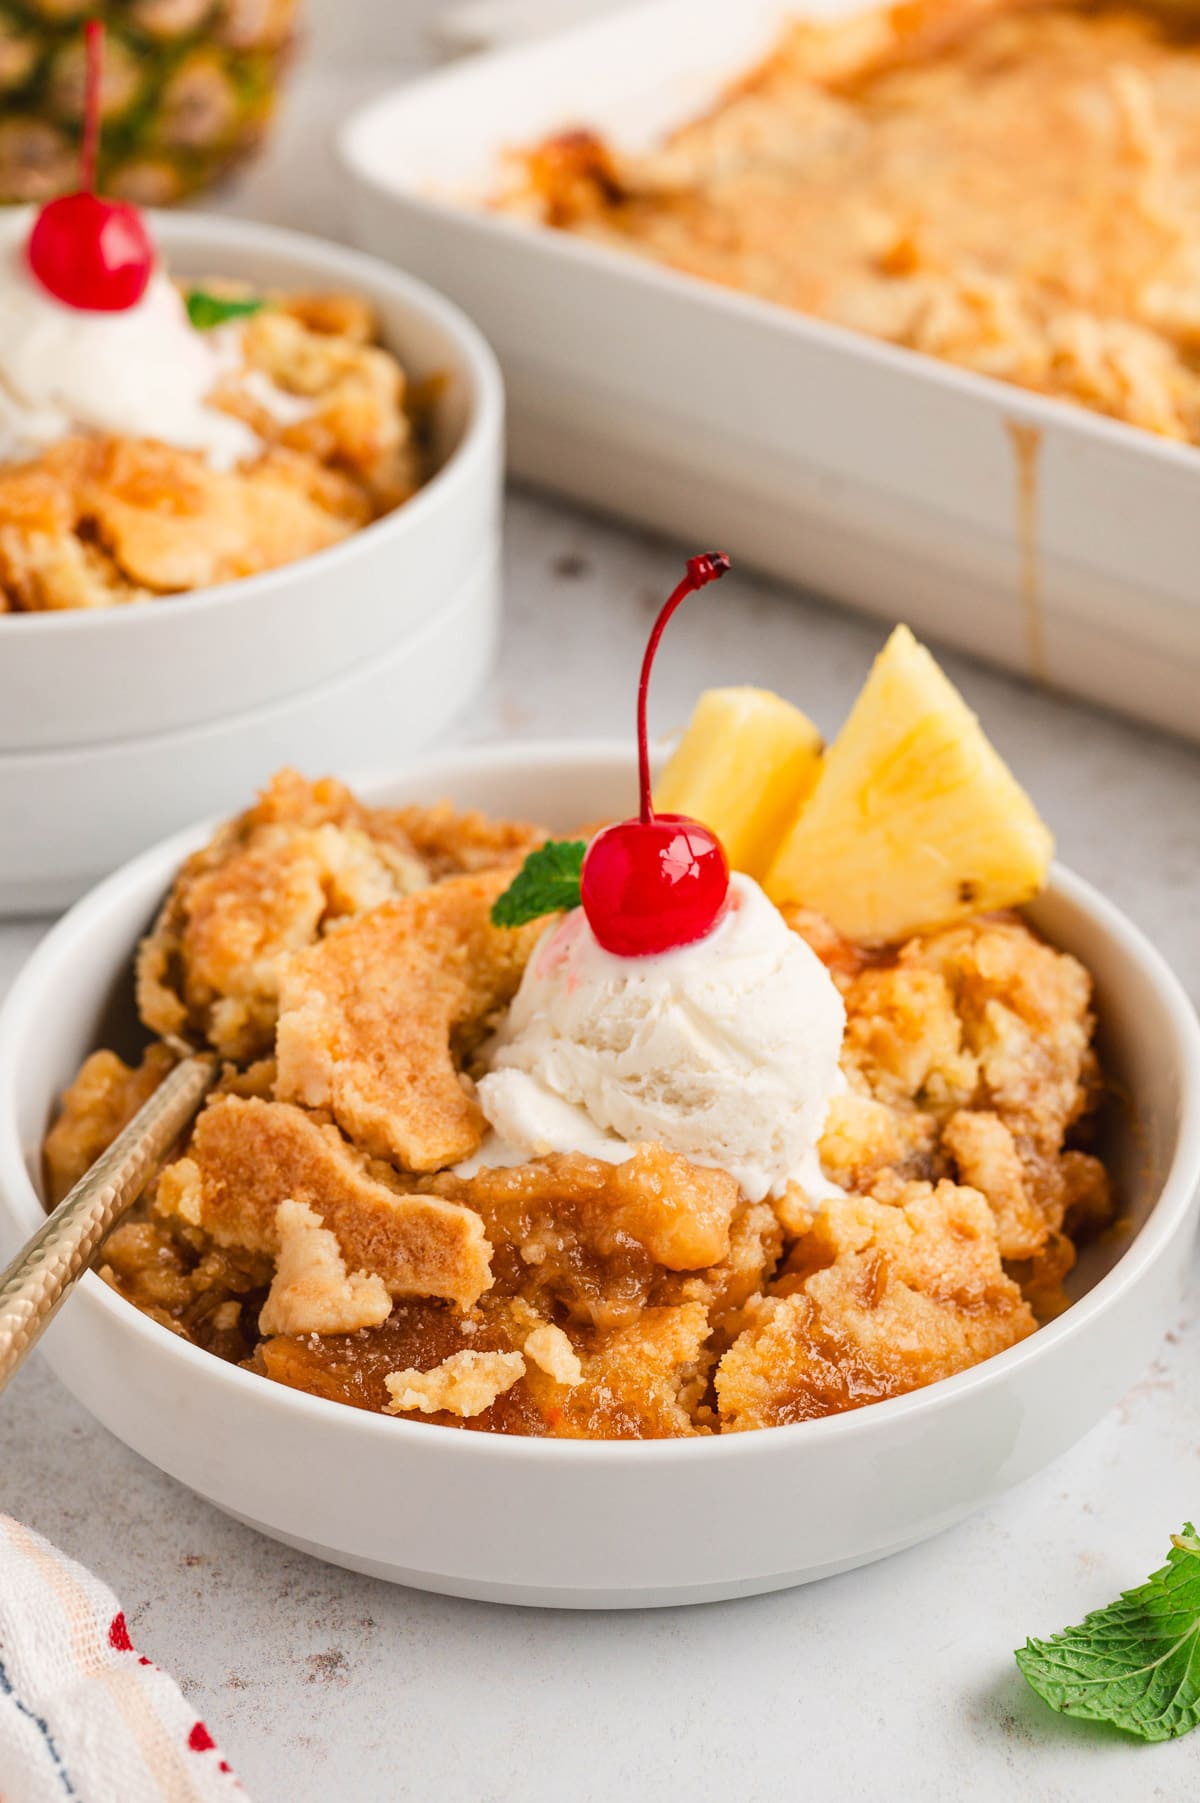 A serving of pineapple dump cake in a white bowl, with a scoop of vanilla ice cream, a cherry and fresh pineapple slices.